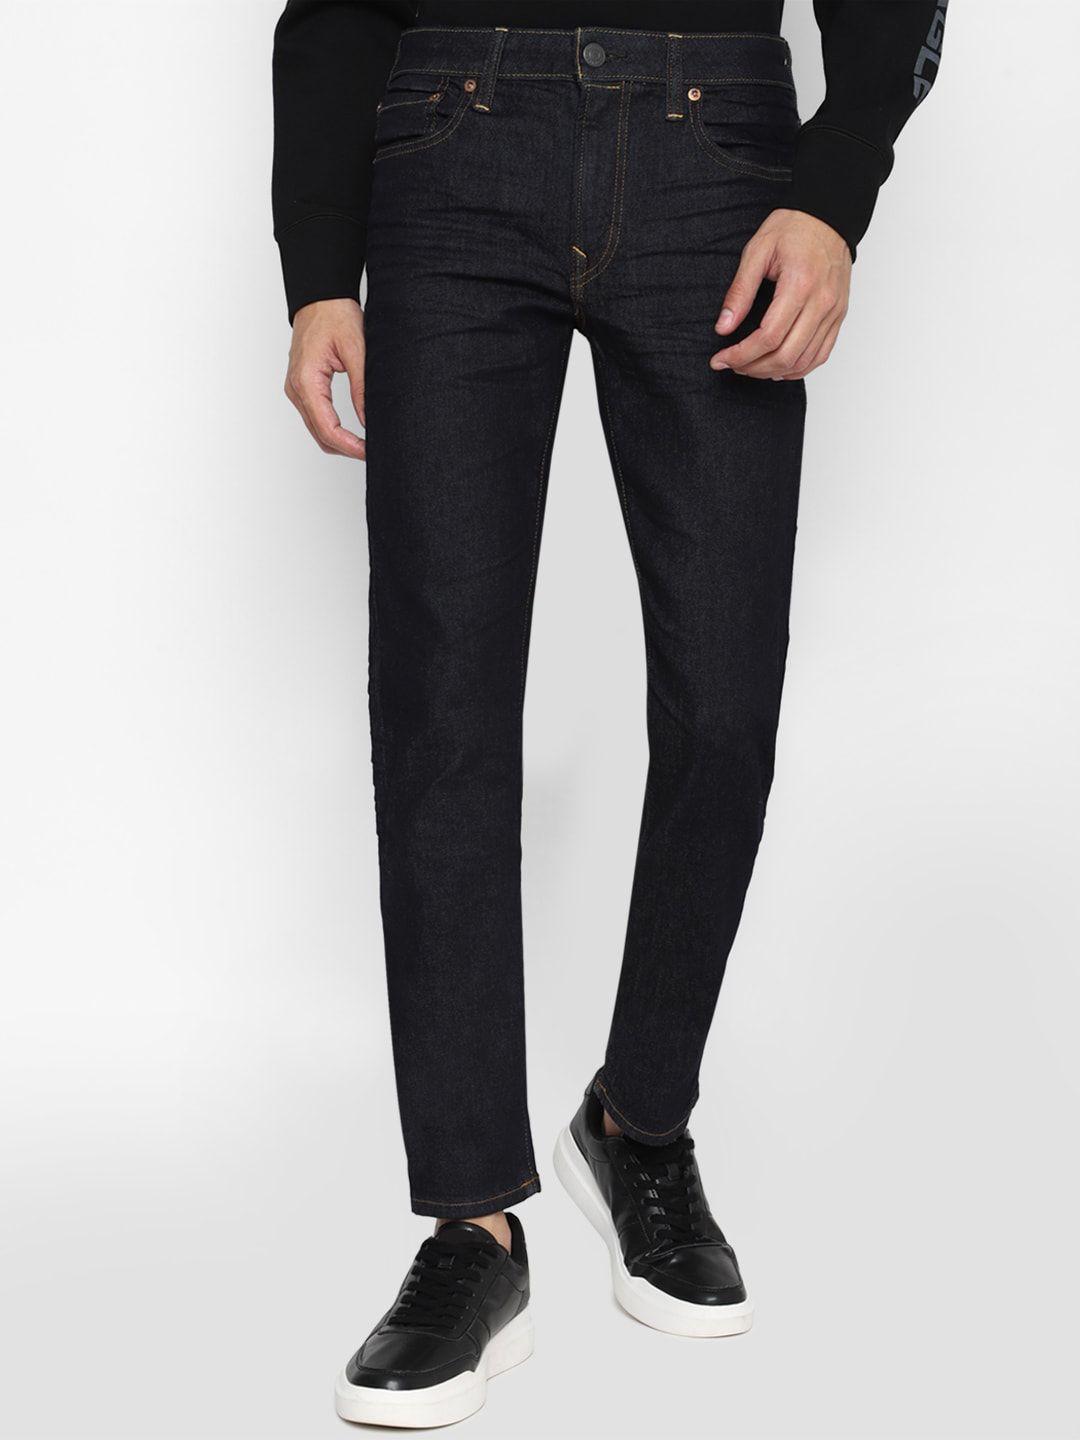 american-eagle-outfitters-men-blue-skinny-fit-jeans